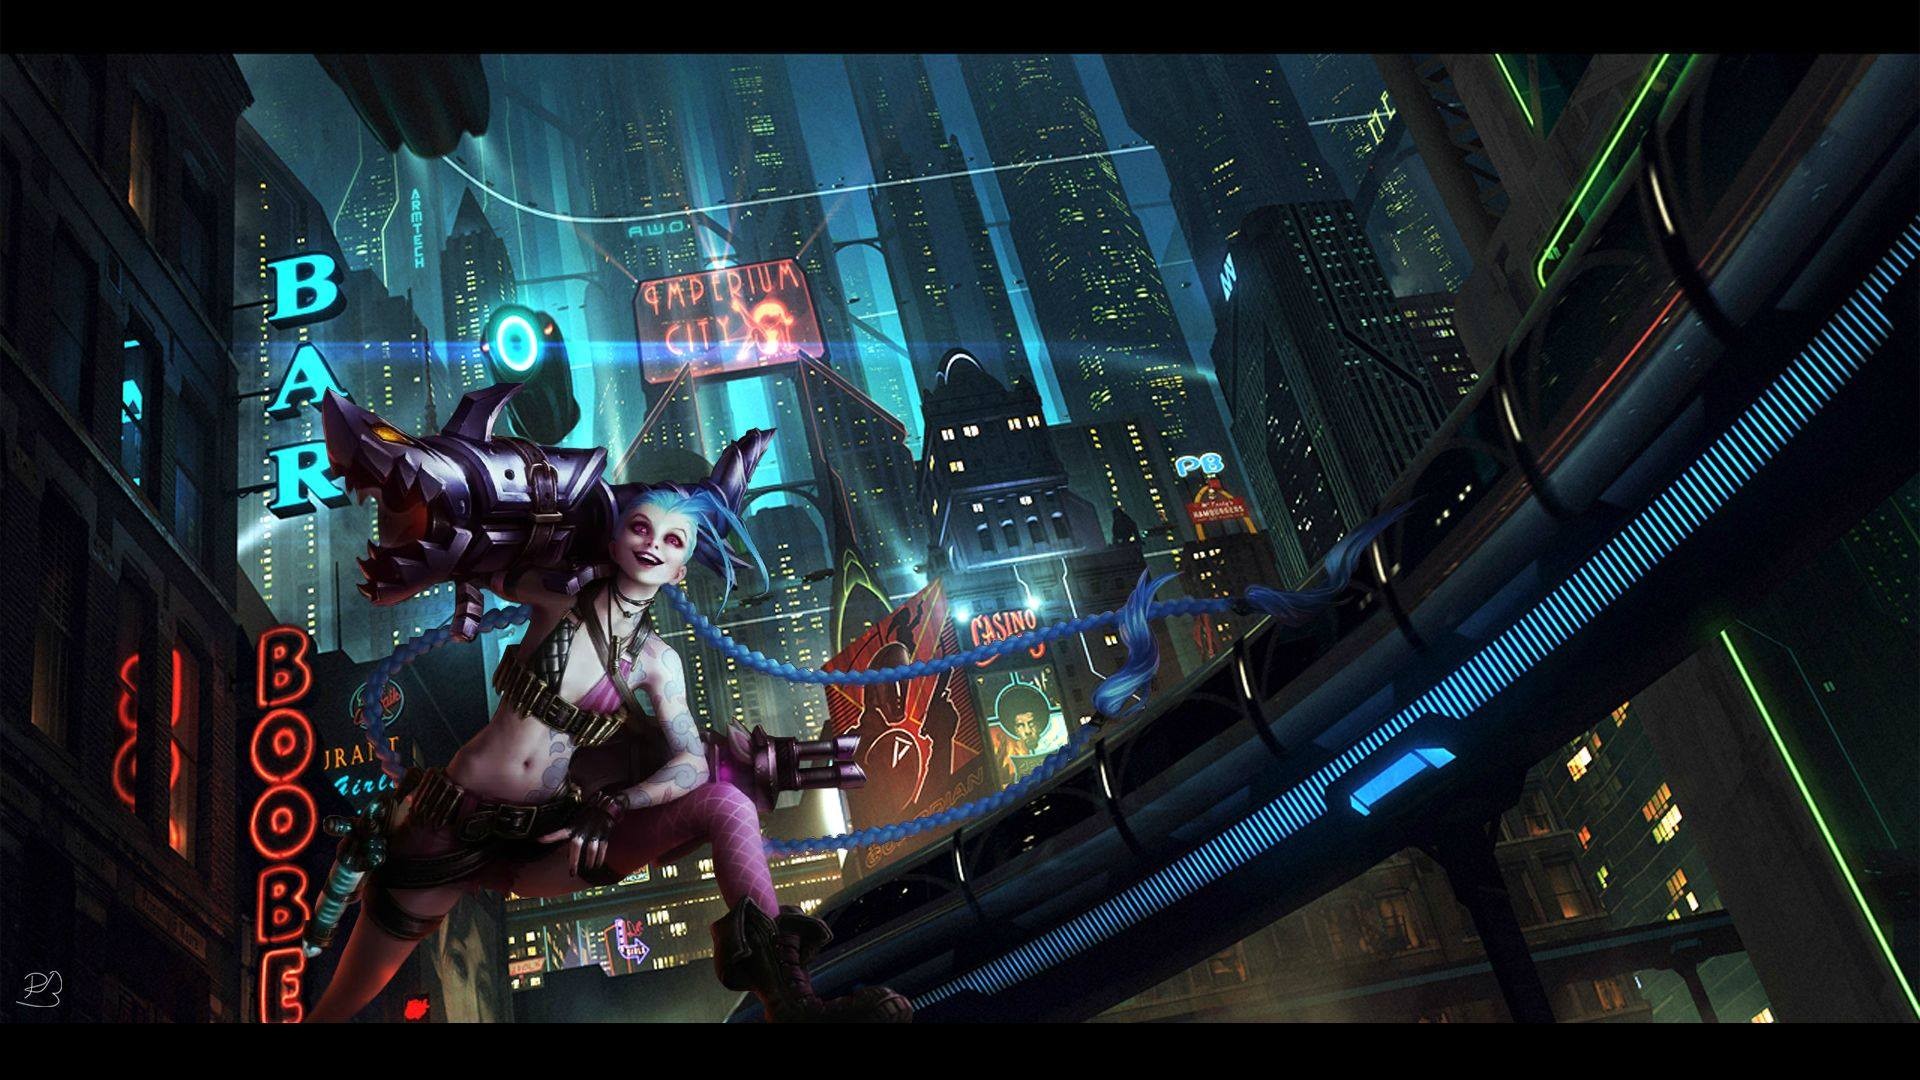 General 1920x1080 Jinx (League of Legends) League of Legends video games PC gaming video game girls blue hair belly inked girls futuristic city futuristic science fiction video game characters